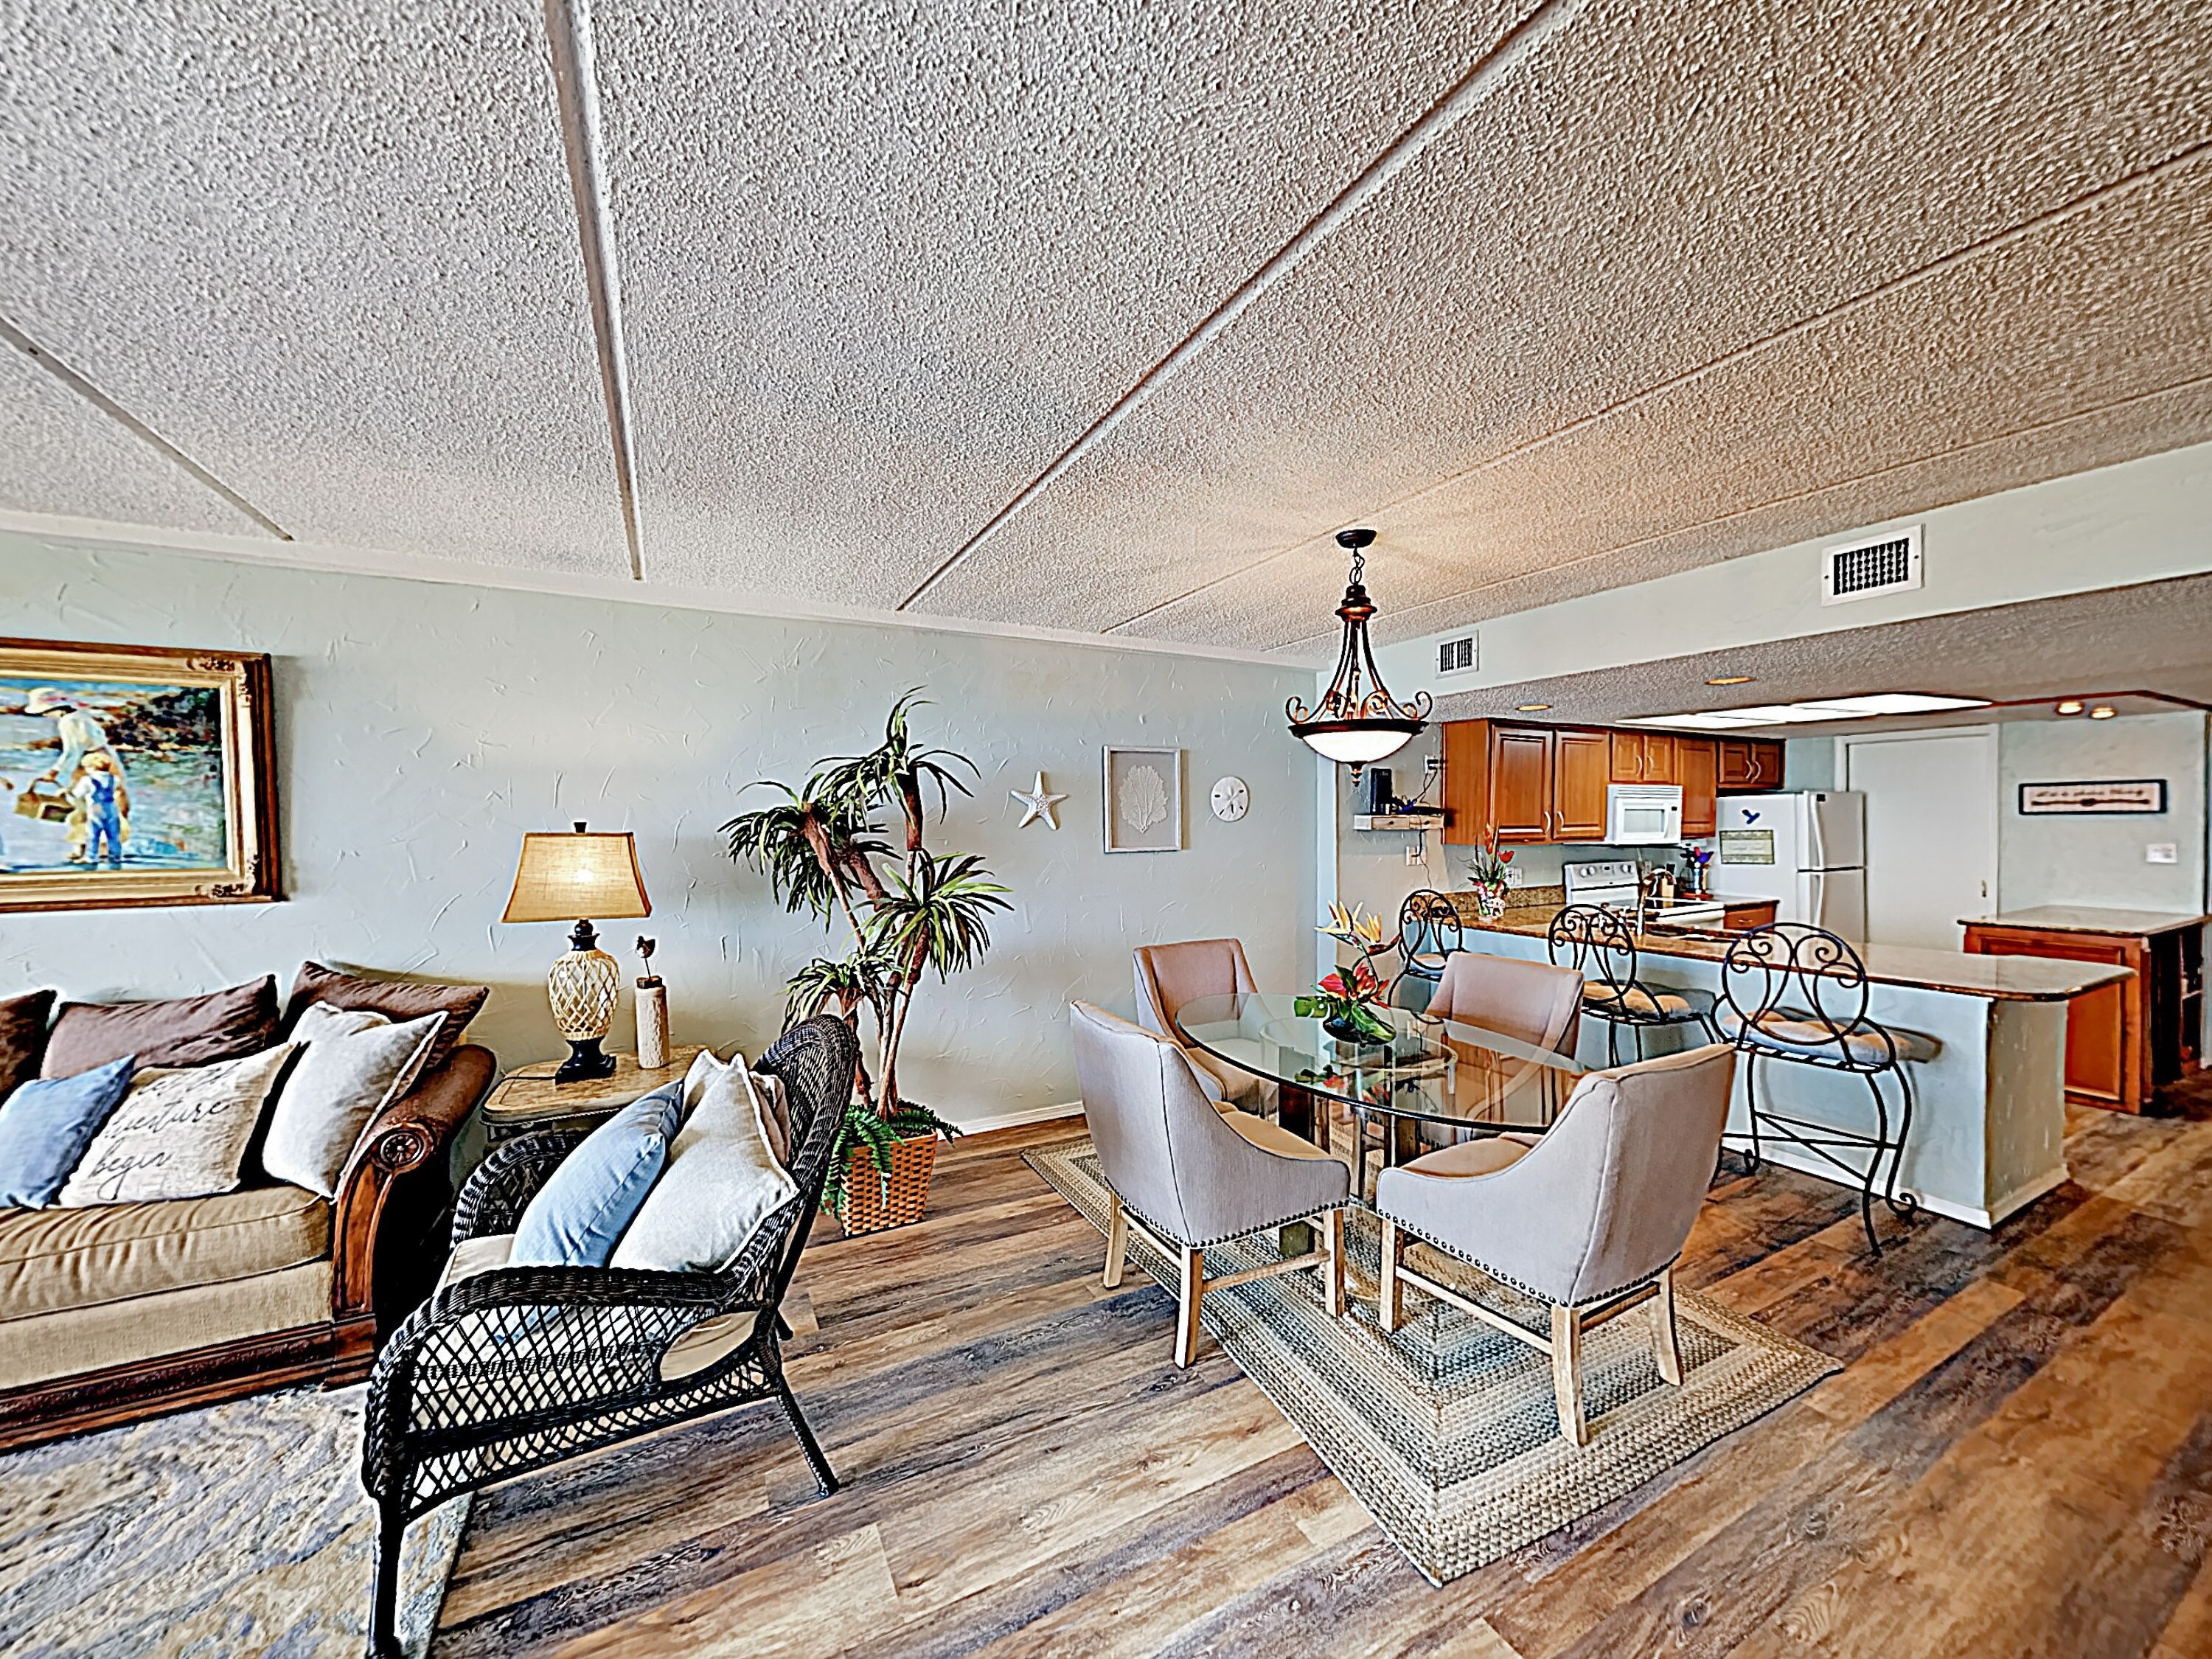 Welcome to Suntide III! This beachfront condo is professionally managed by TurnKey Vacation Rentals.